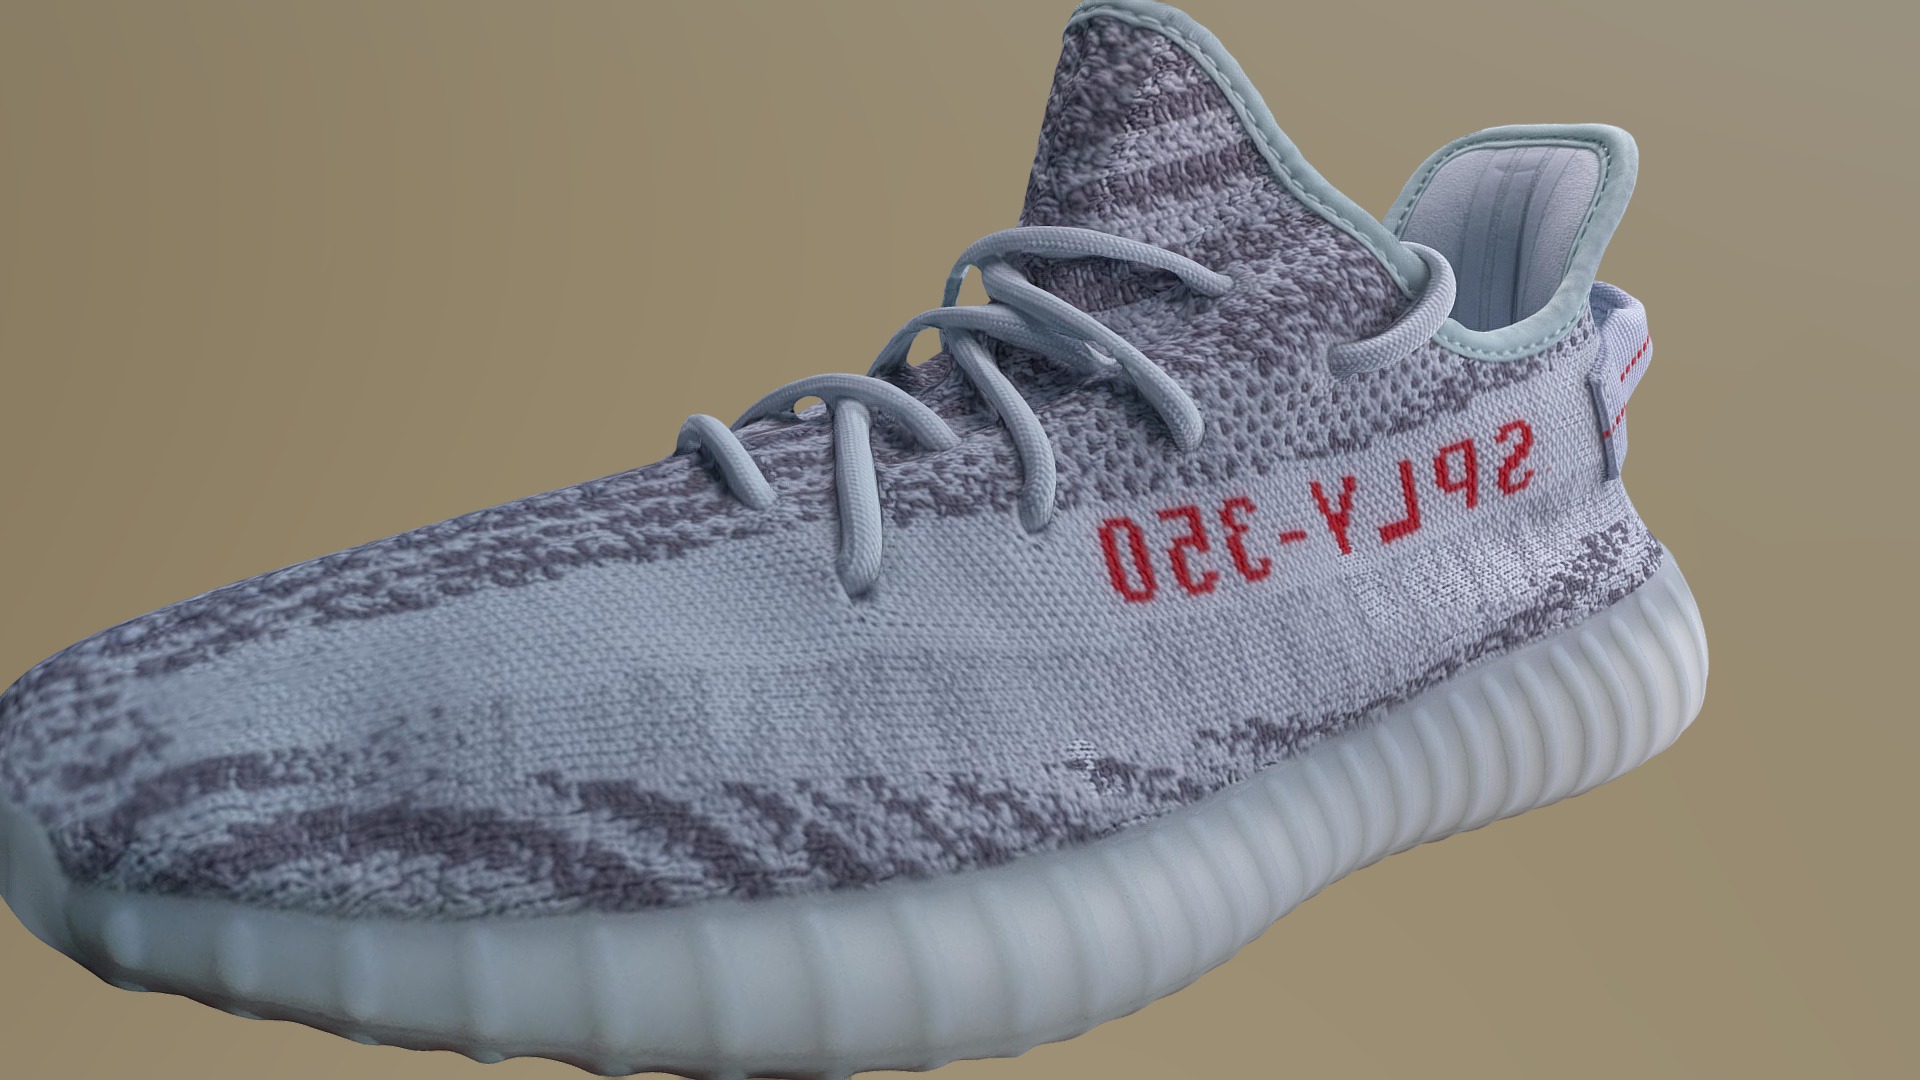 3D model Adidas Yeezy 350 Sneakers Shoes - This is a 3D model of the Adidas Yeezy 350 Sneakers Shoes. The 3D model is about a white and grey shoe.